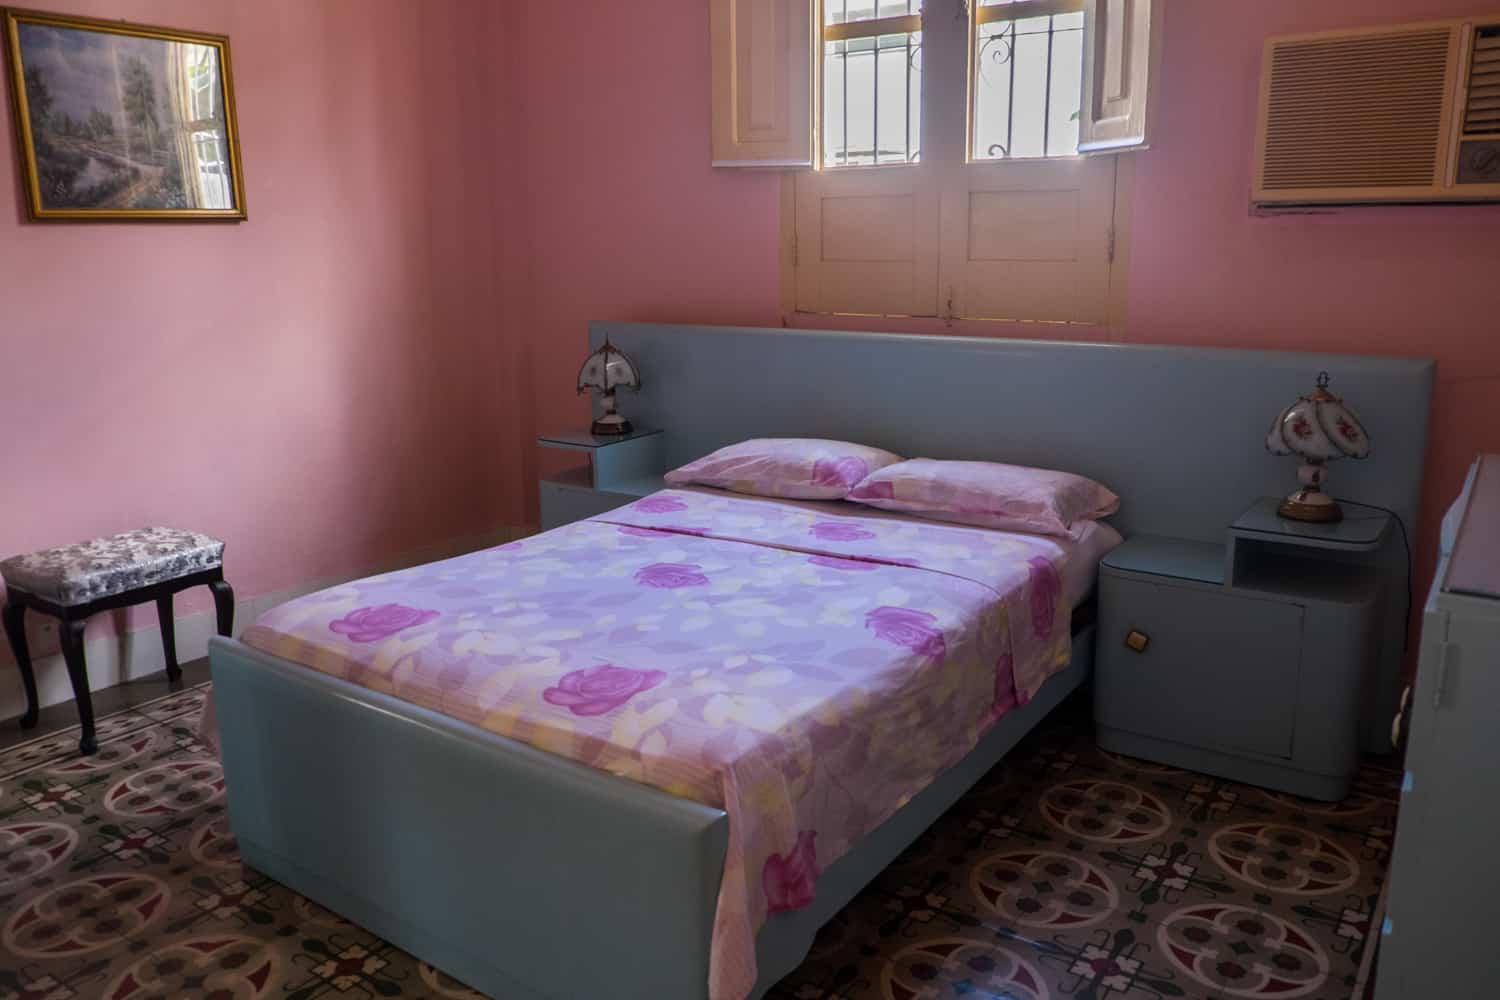 A pink walled bedroom with blue furniture at a Casa accommodation in Cuba.